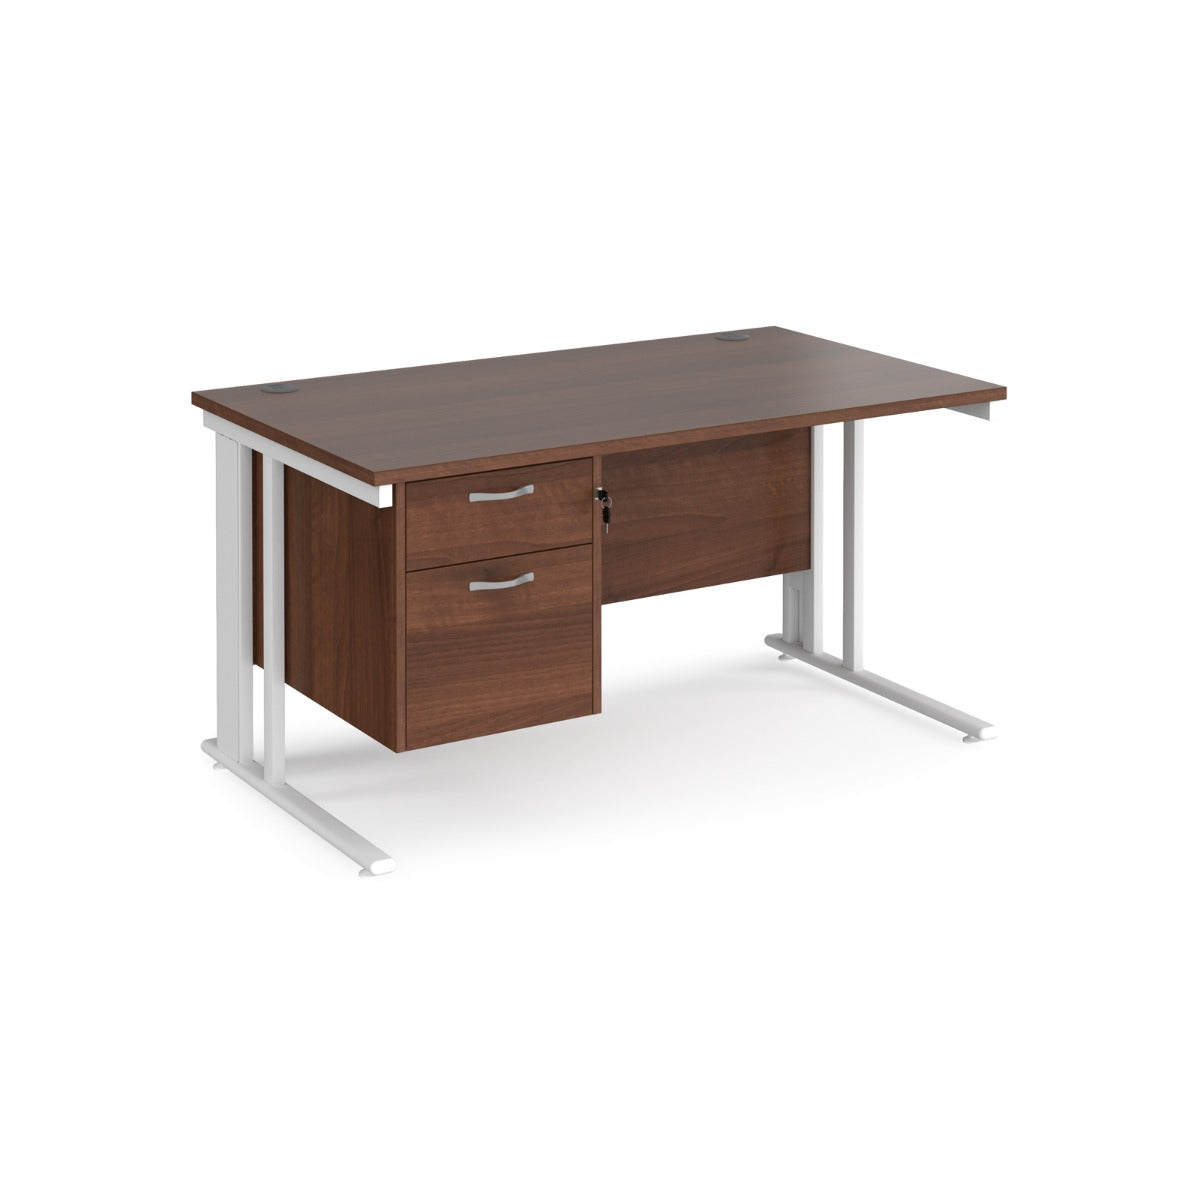 Maestro 800mm Deep Straight Cable Management Leg Office Desk with Two Drawer Pedestal